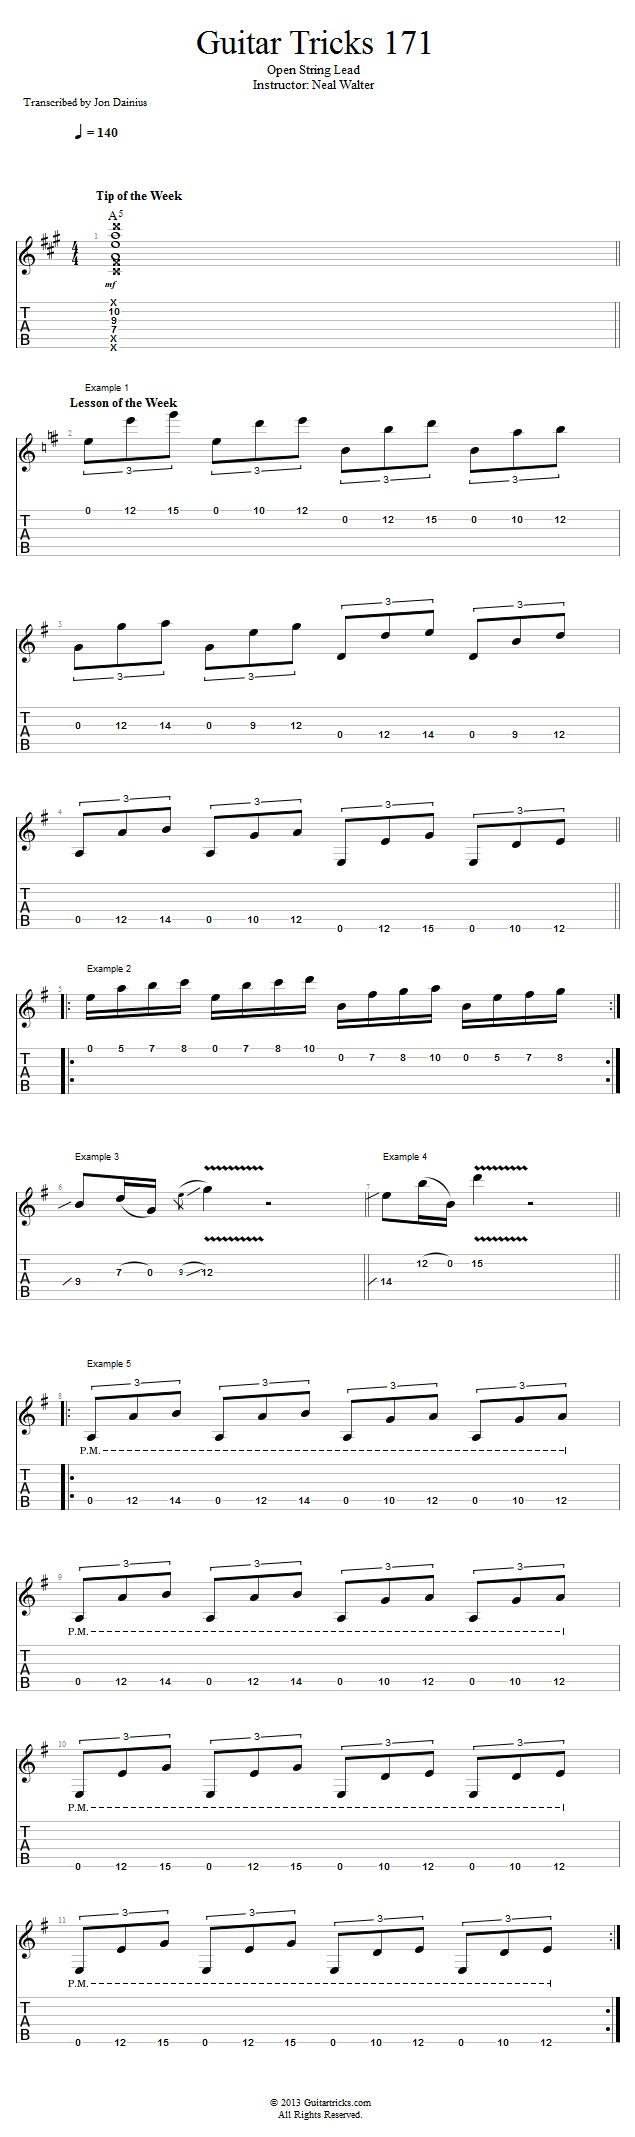 Guitar Tricks 171: Open String Lead  song notation